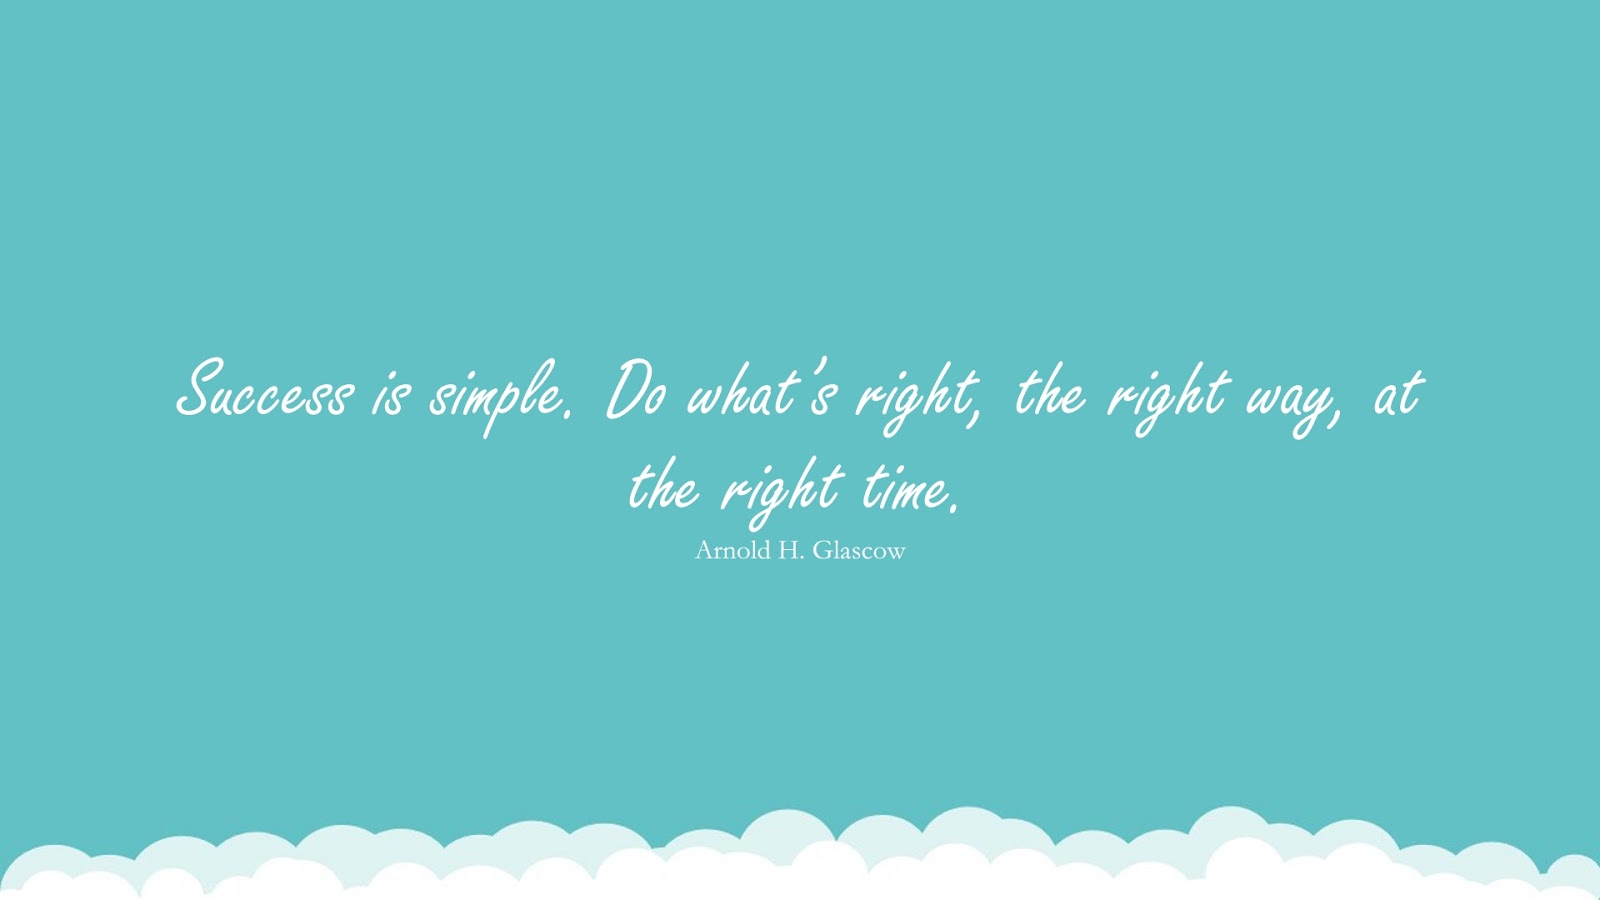 Success is simple. Do what’s right, the right way, at the right time. (Arnold H. Glascow);  #SuccessQuotes